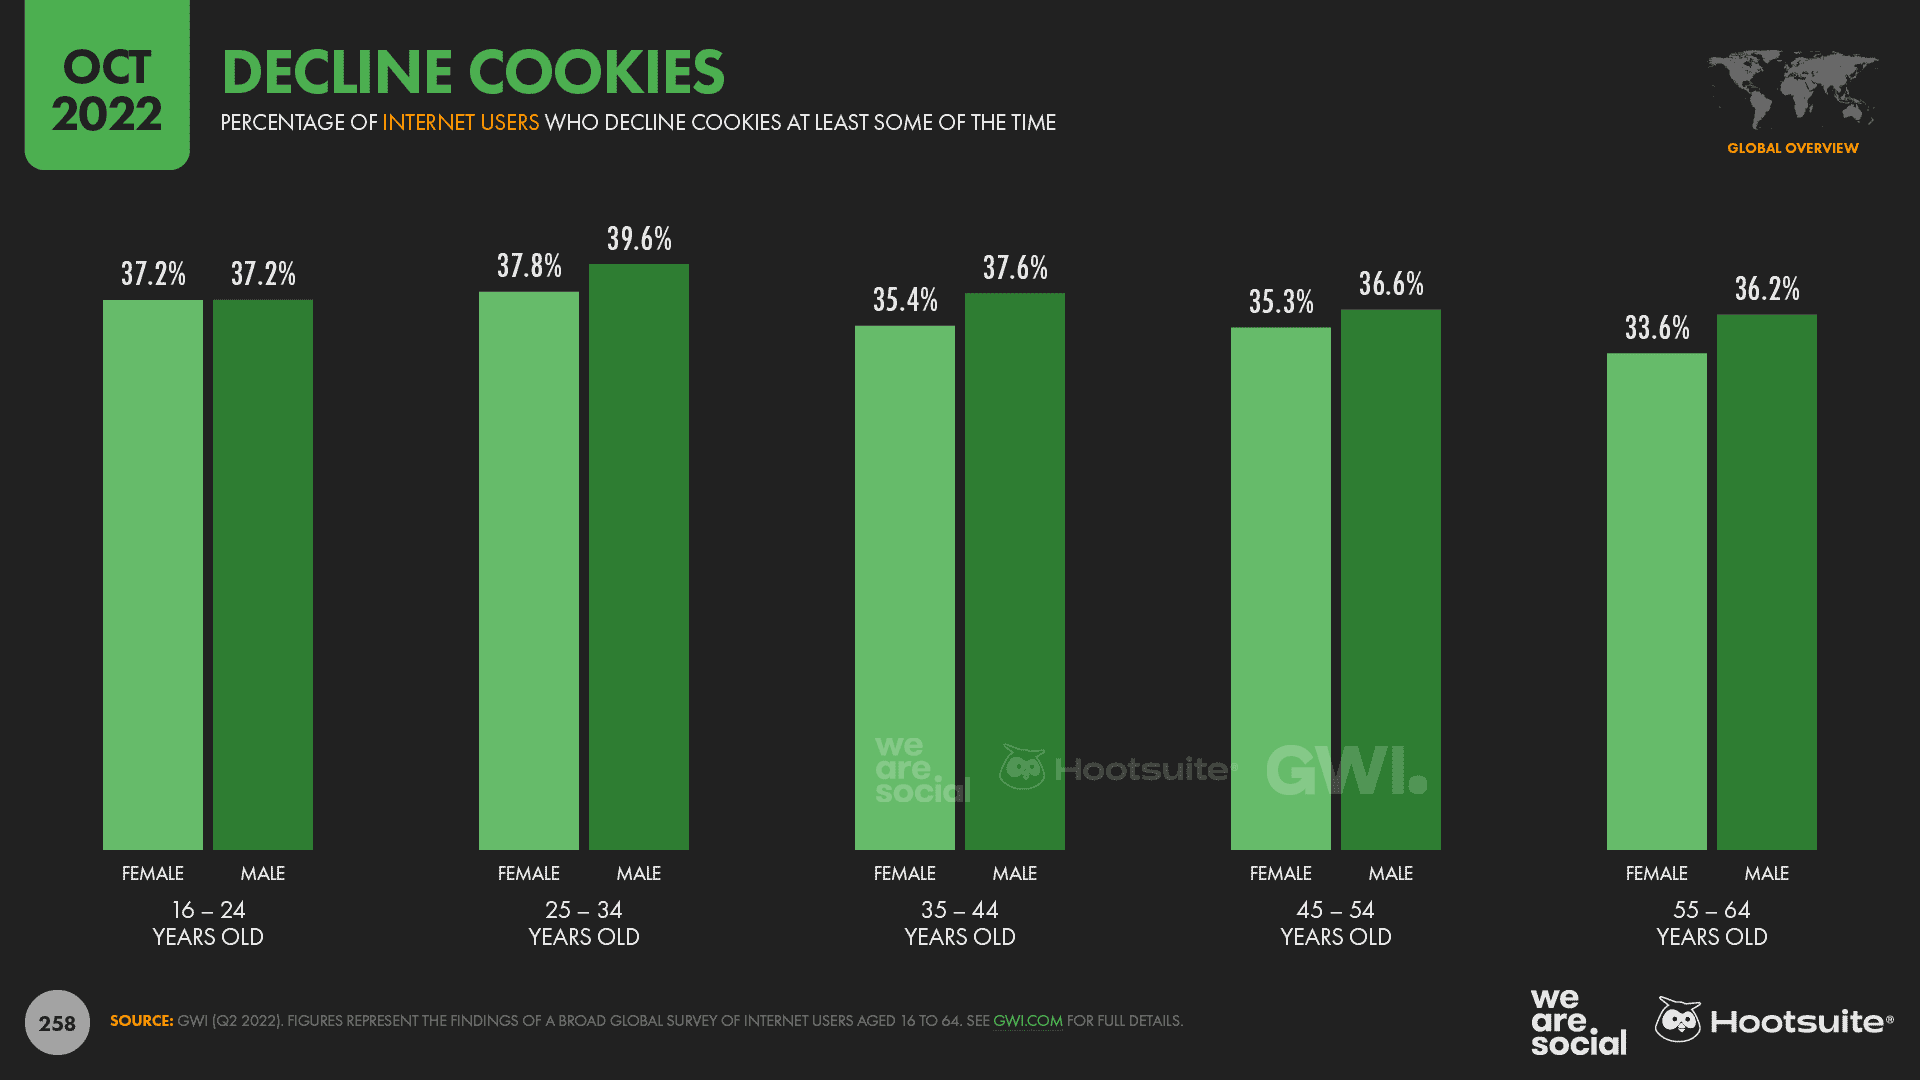 Chart showing declining cookies by age and gender